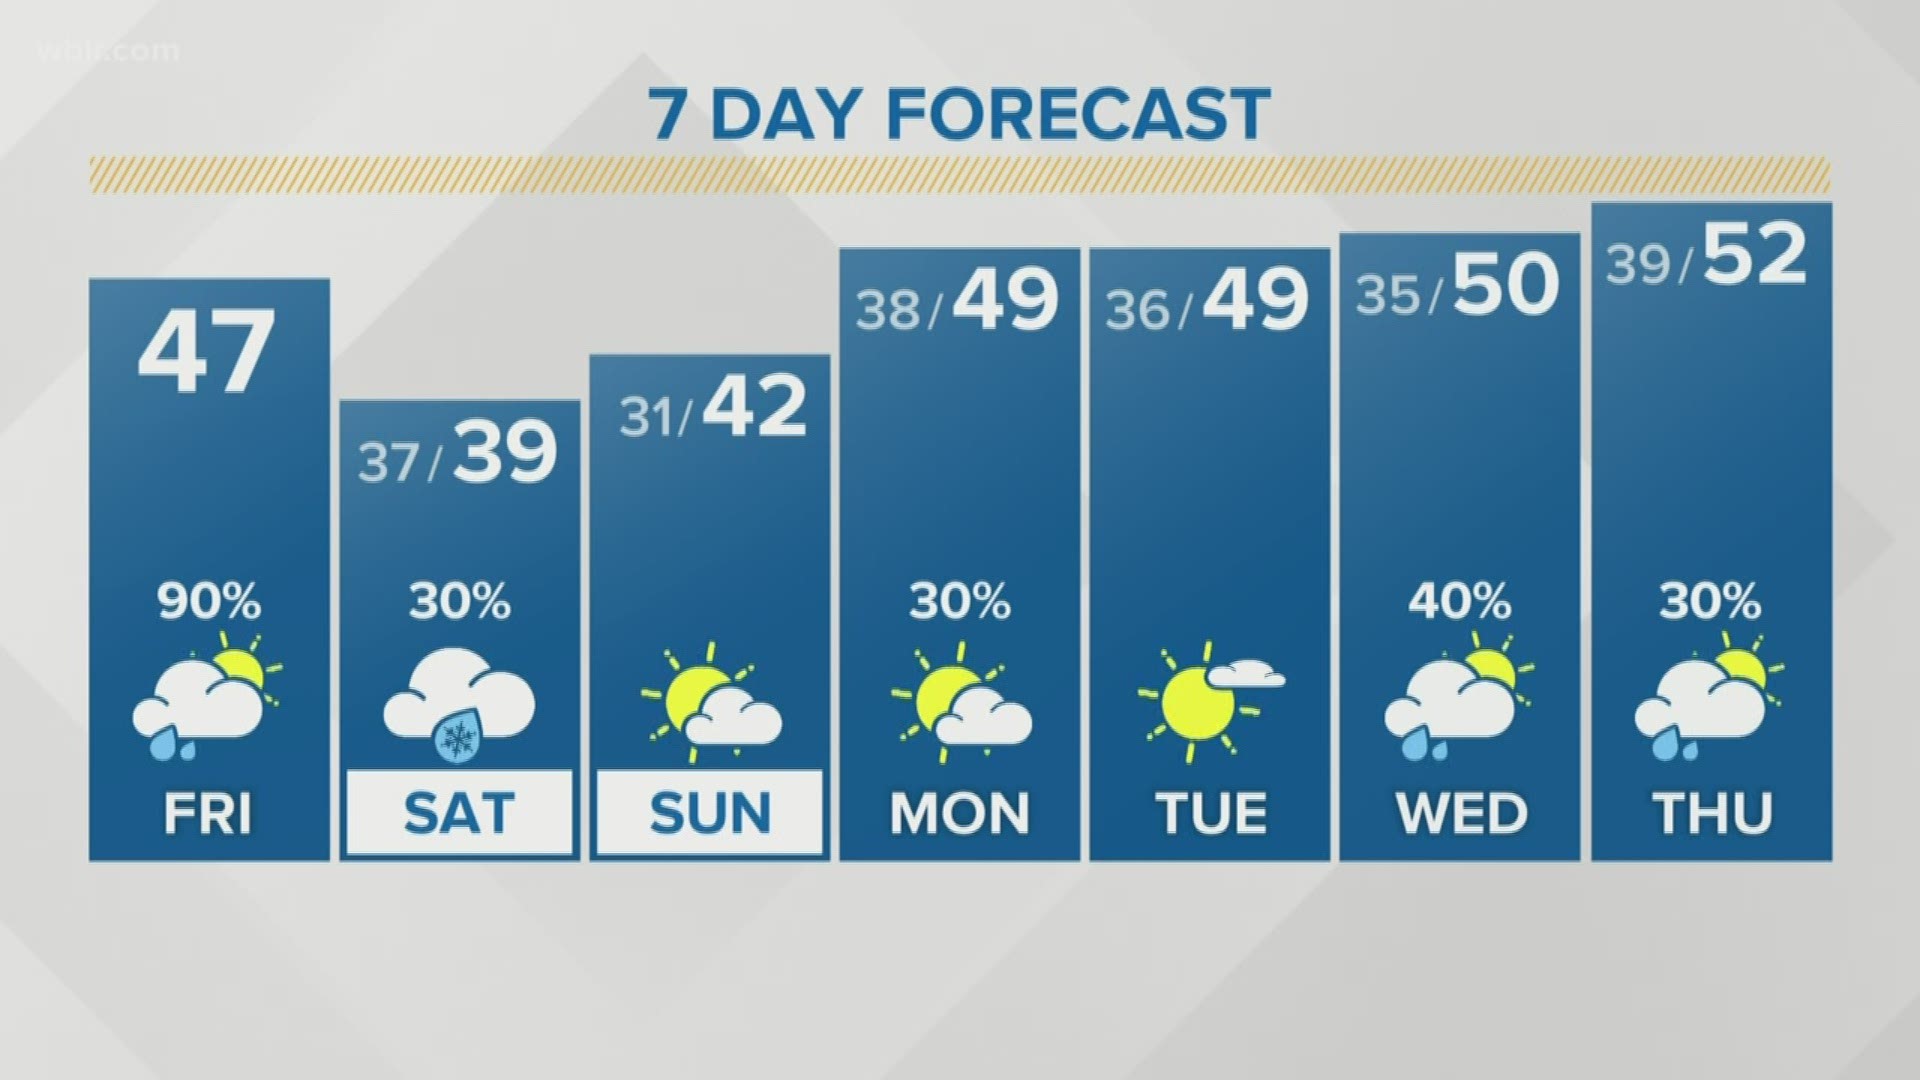 This weekend should be mainly dry and chilly with some flurries Saturday